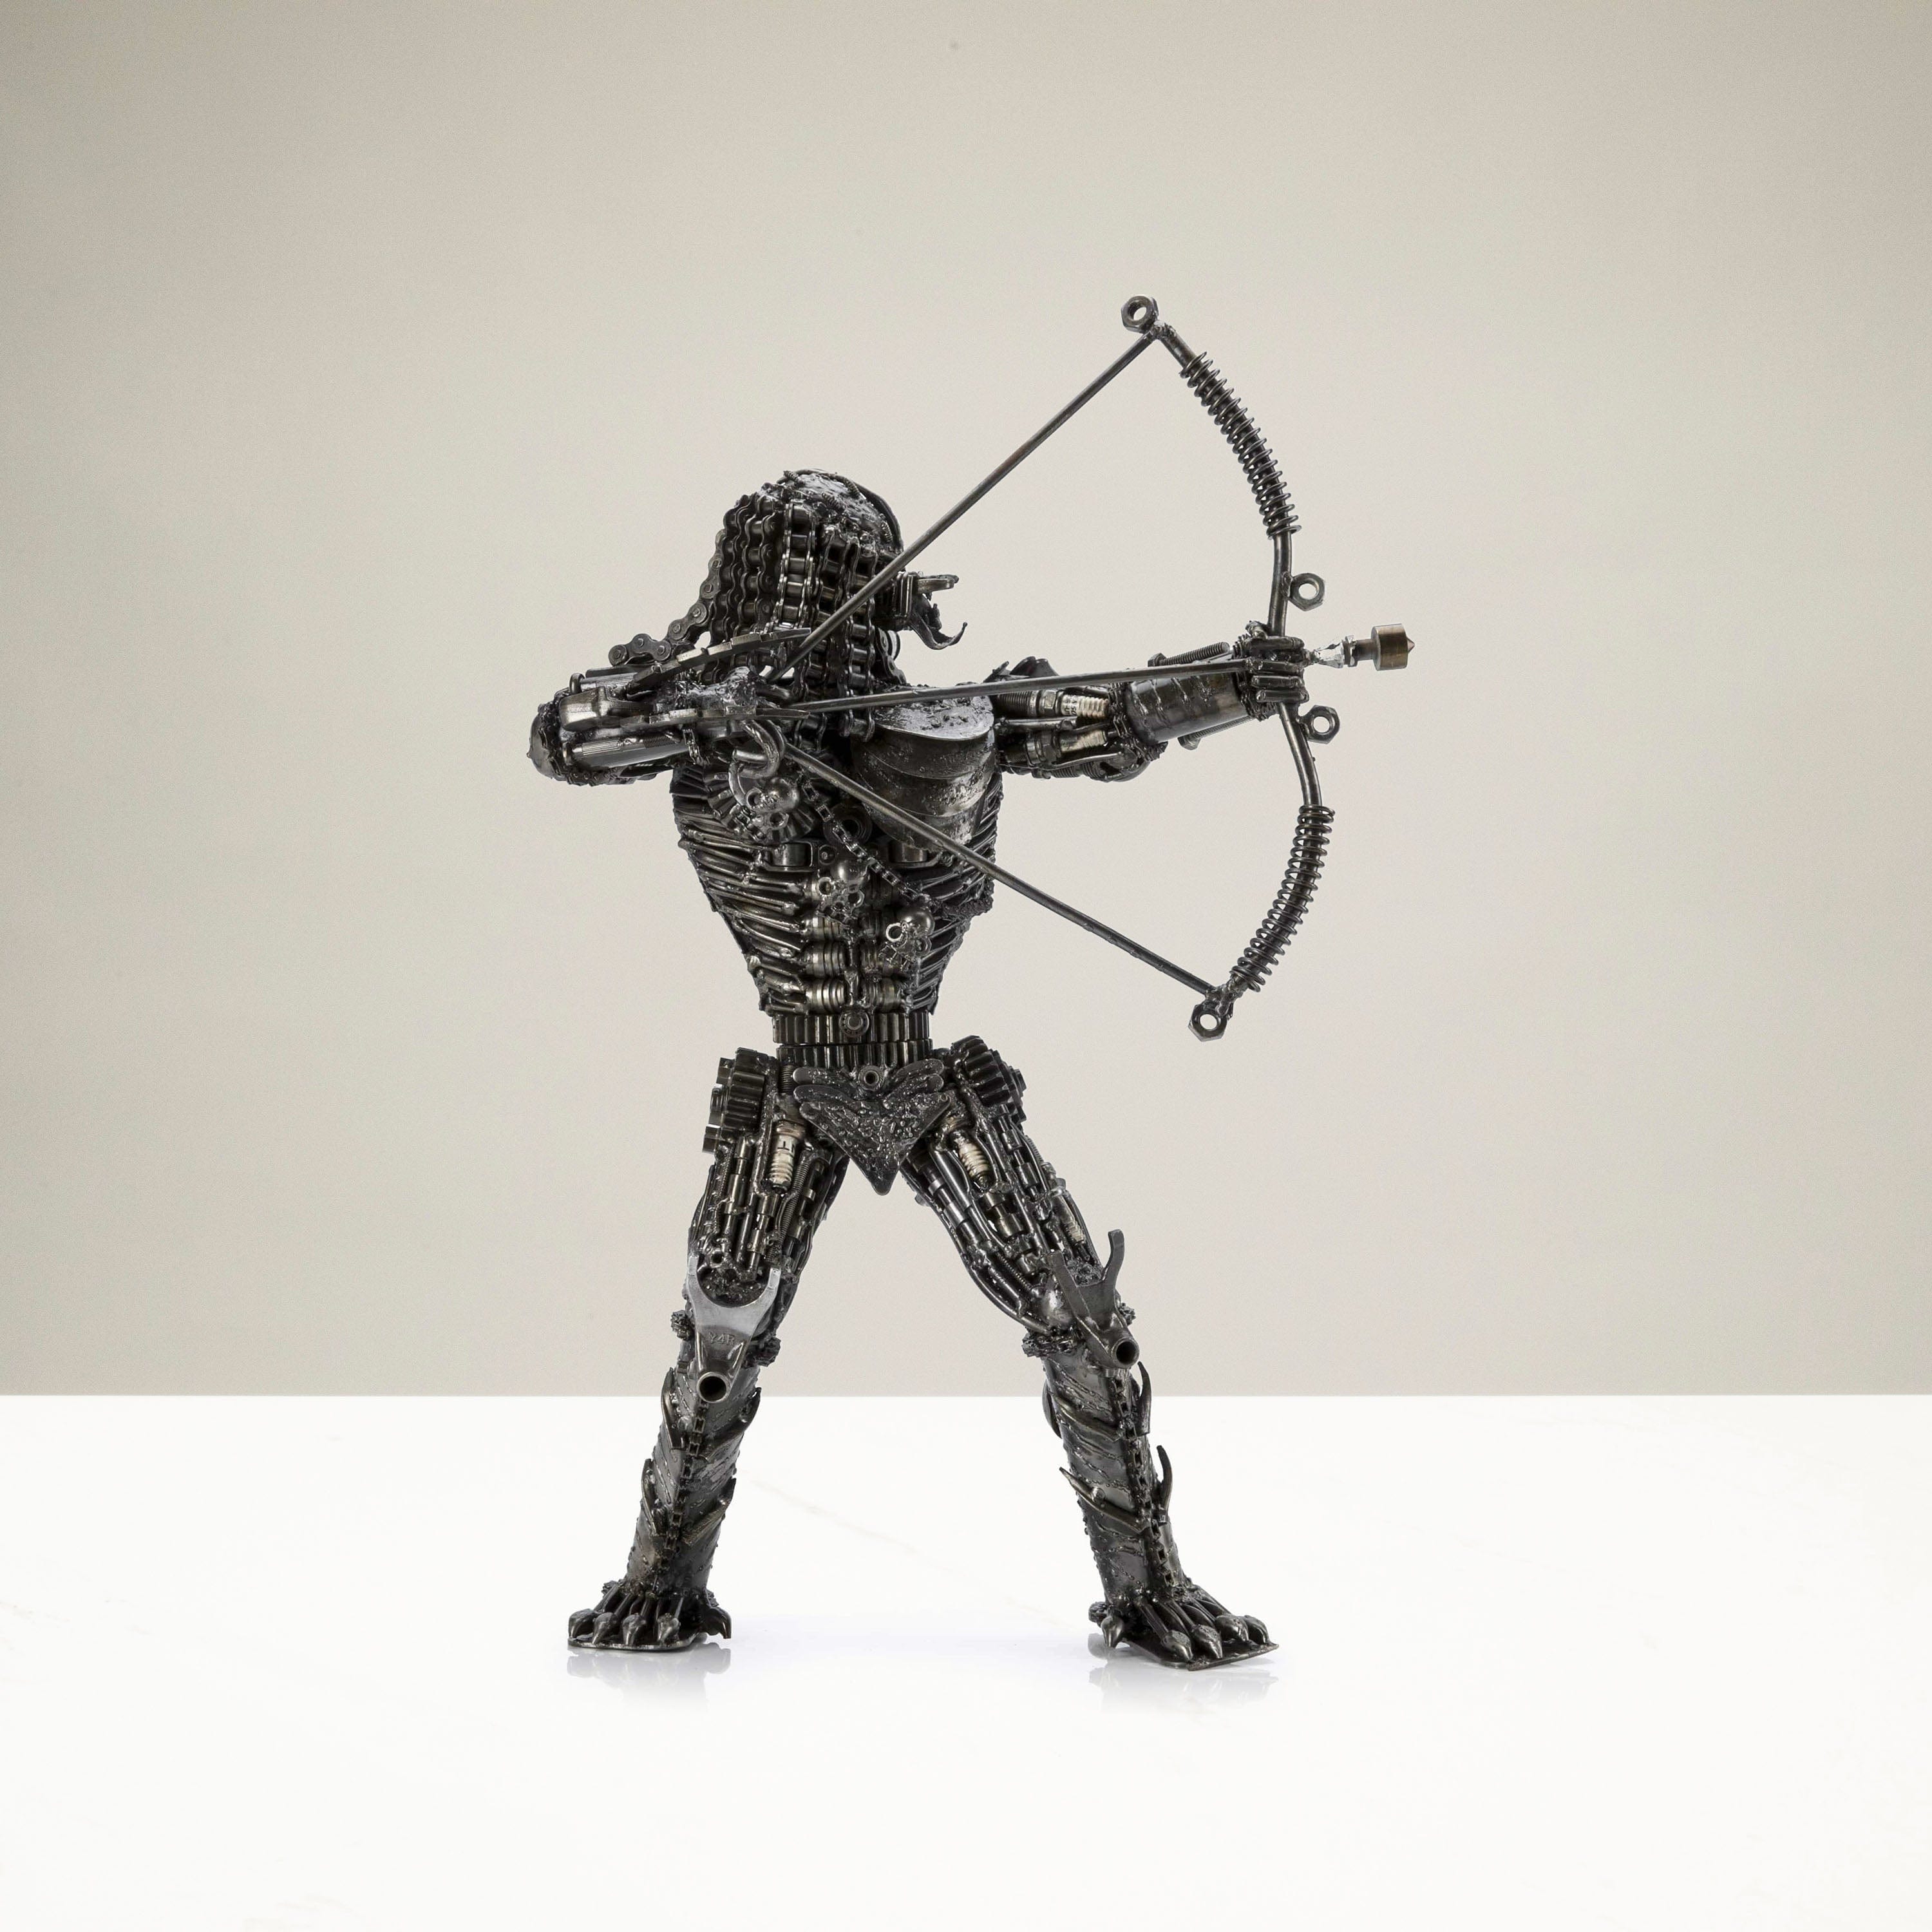 Kalifano Recycled Metal Art 23" Predator with Bow & Arrow Inspired Recycled Metal Sculpture RMS-P58x41-S